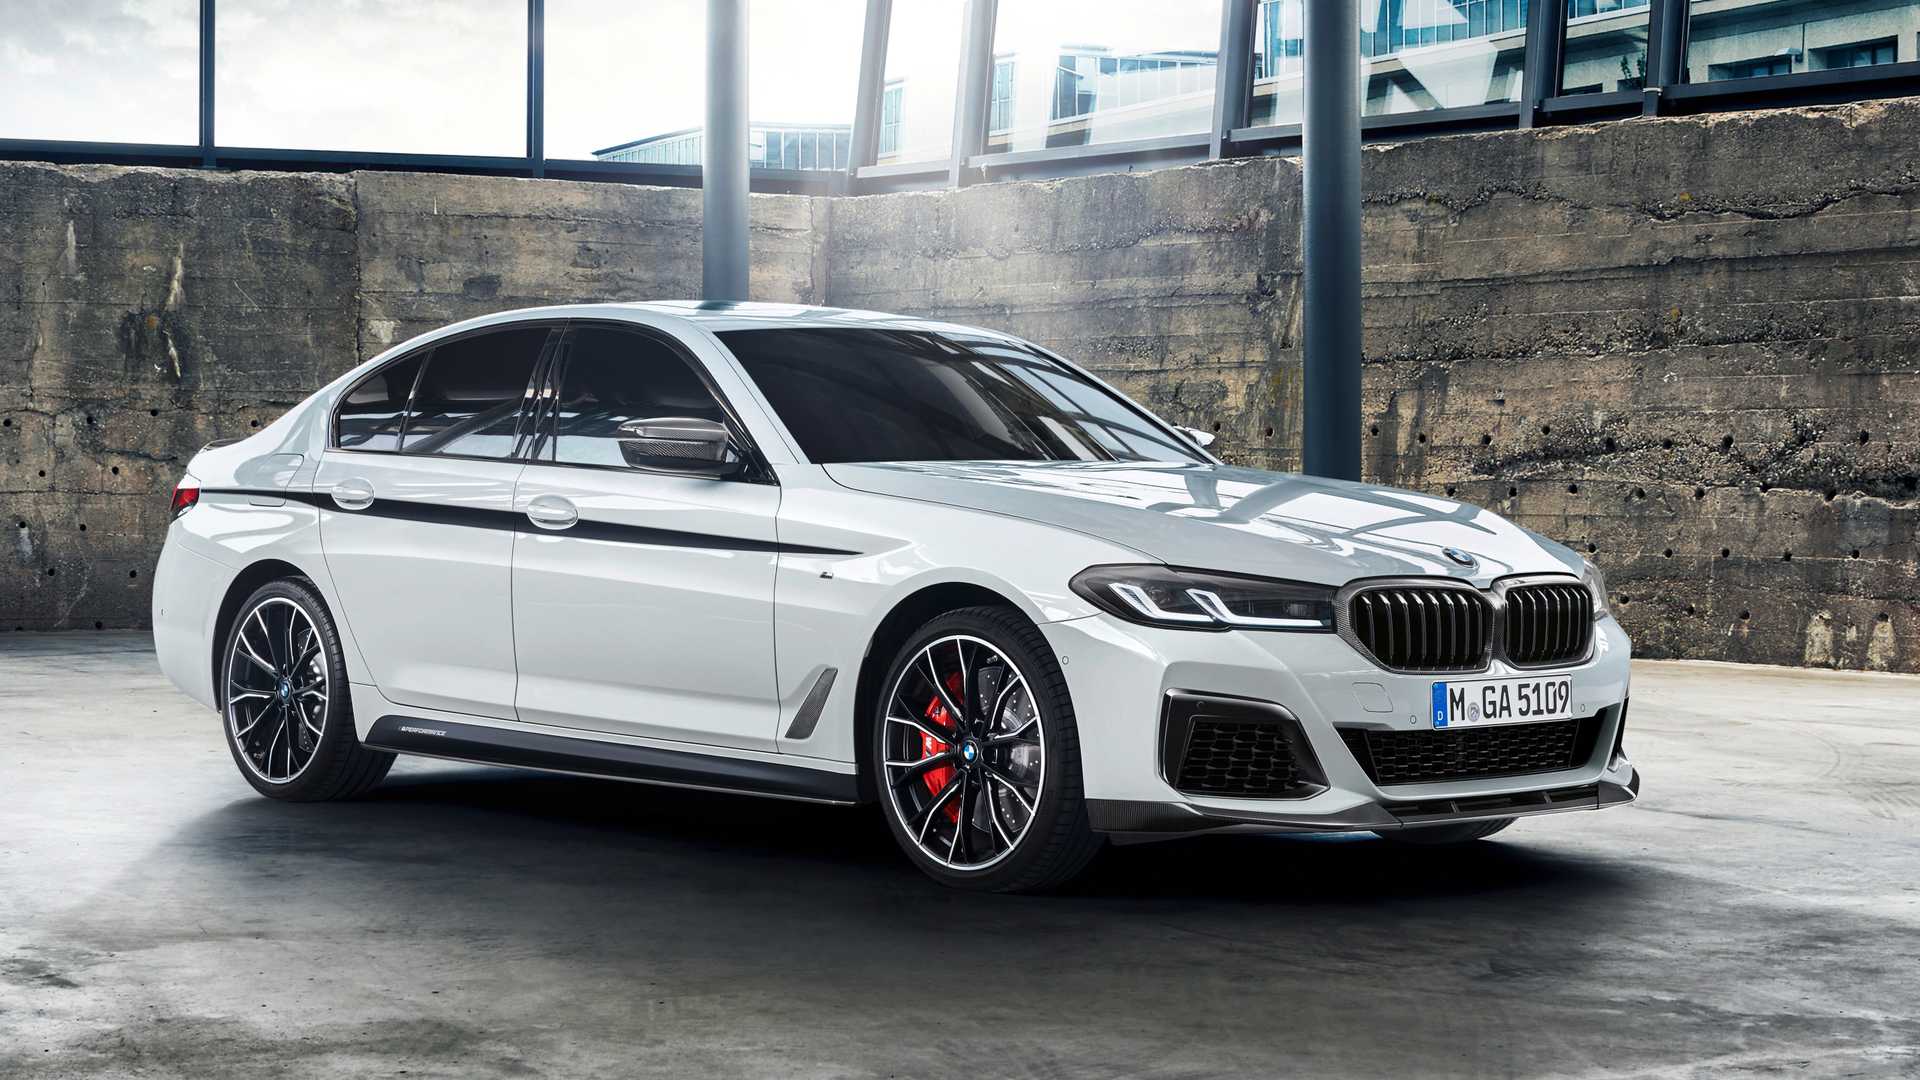 BMW 5 Series, M5 and M5 Competition Look Delicious With M Performance Parts  - autoevolution